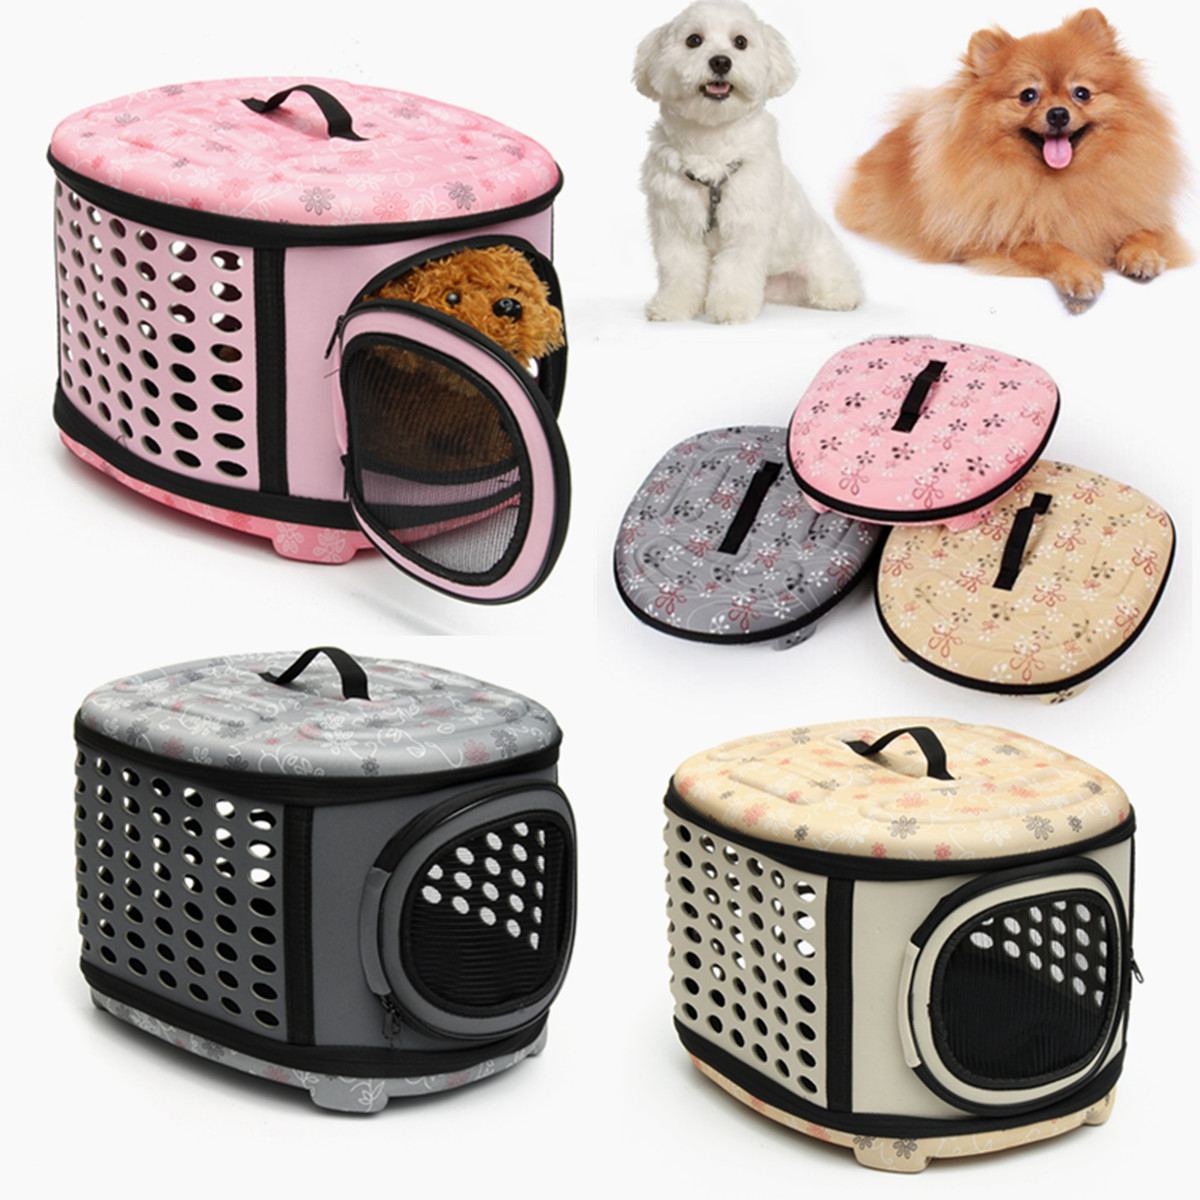 Small-Pet-Dog-Cat-Puppy-Carrier-Portable-Cage-Crate-Transporter-Bag-1166529-3